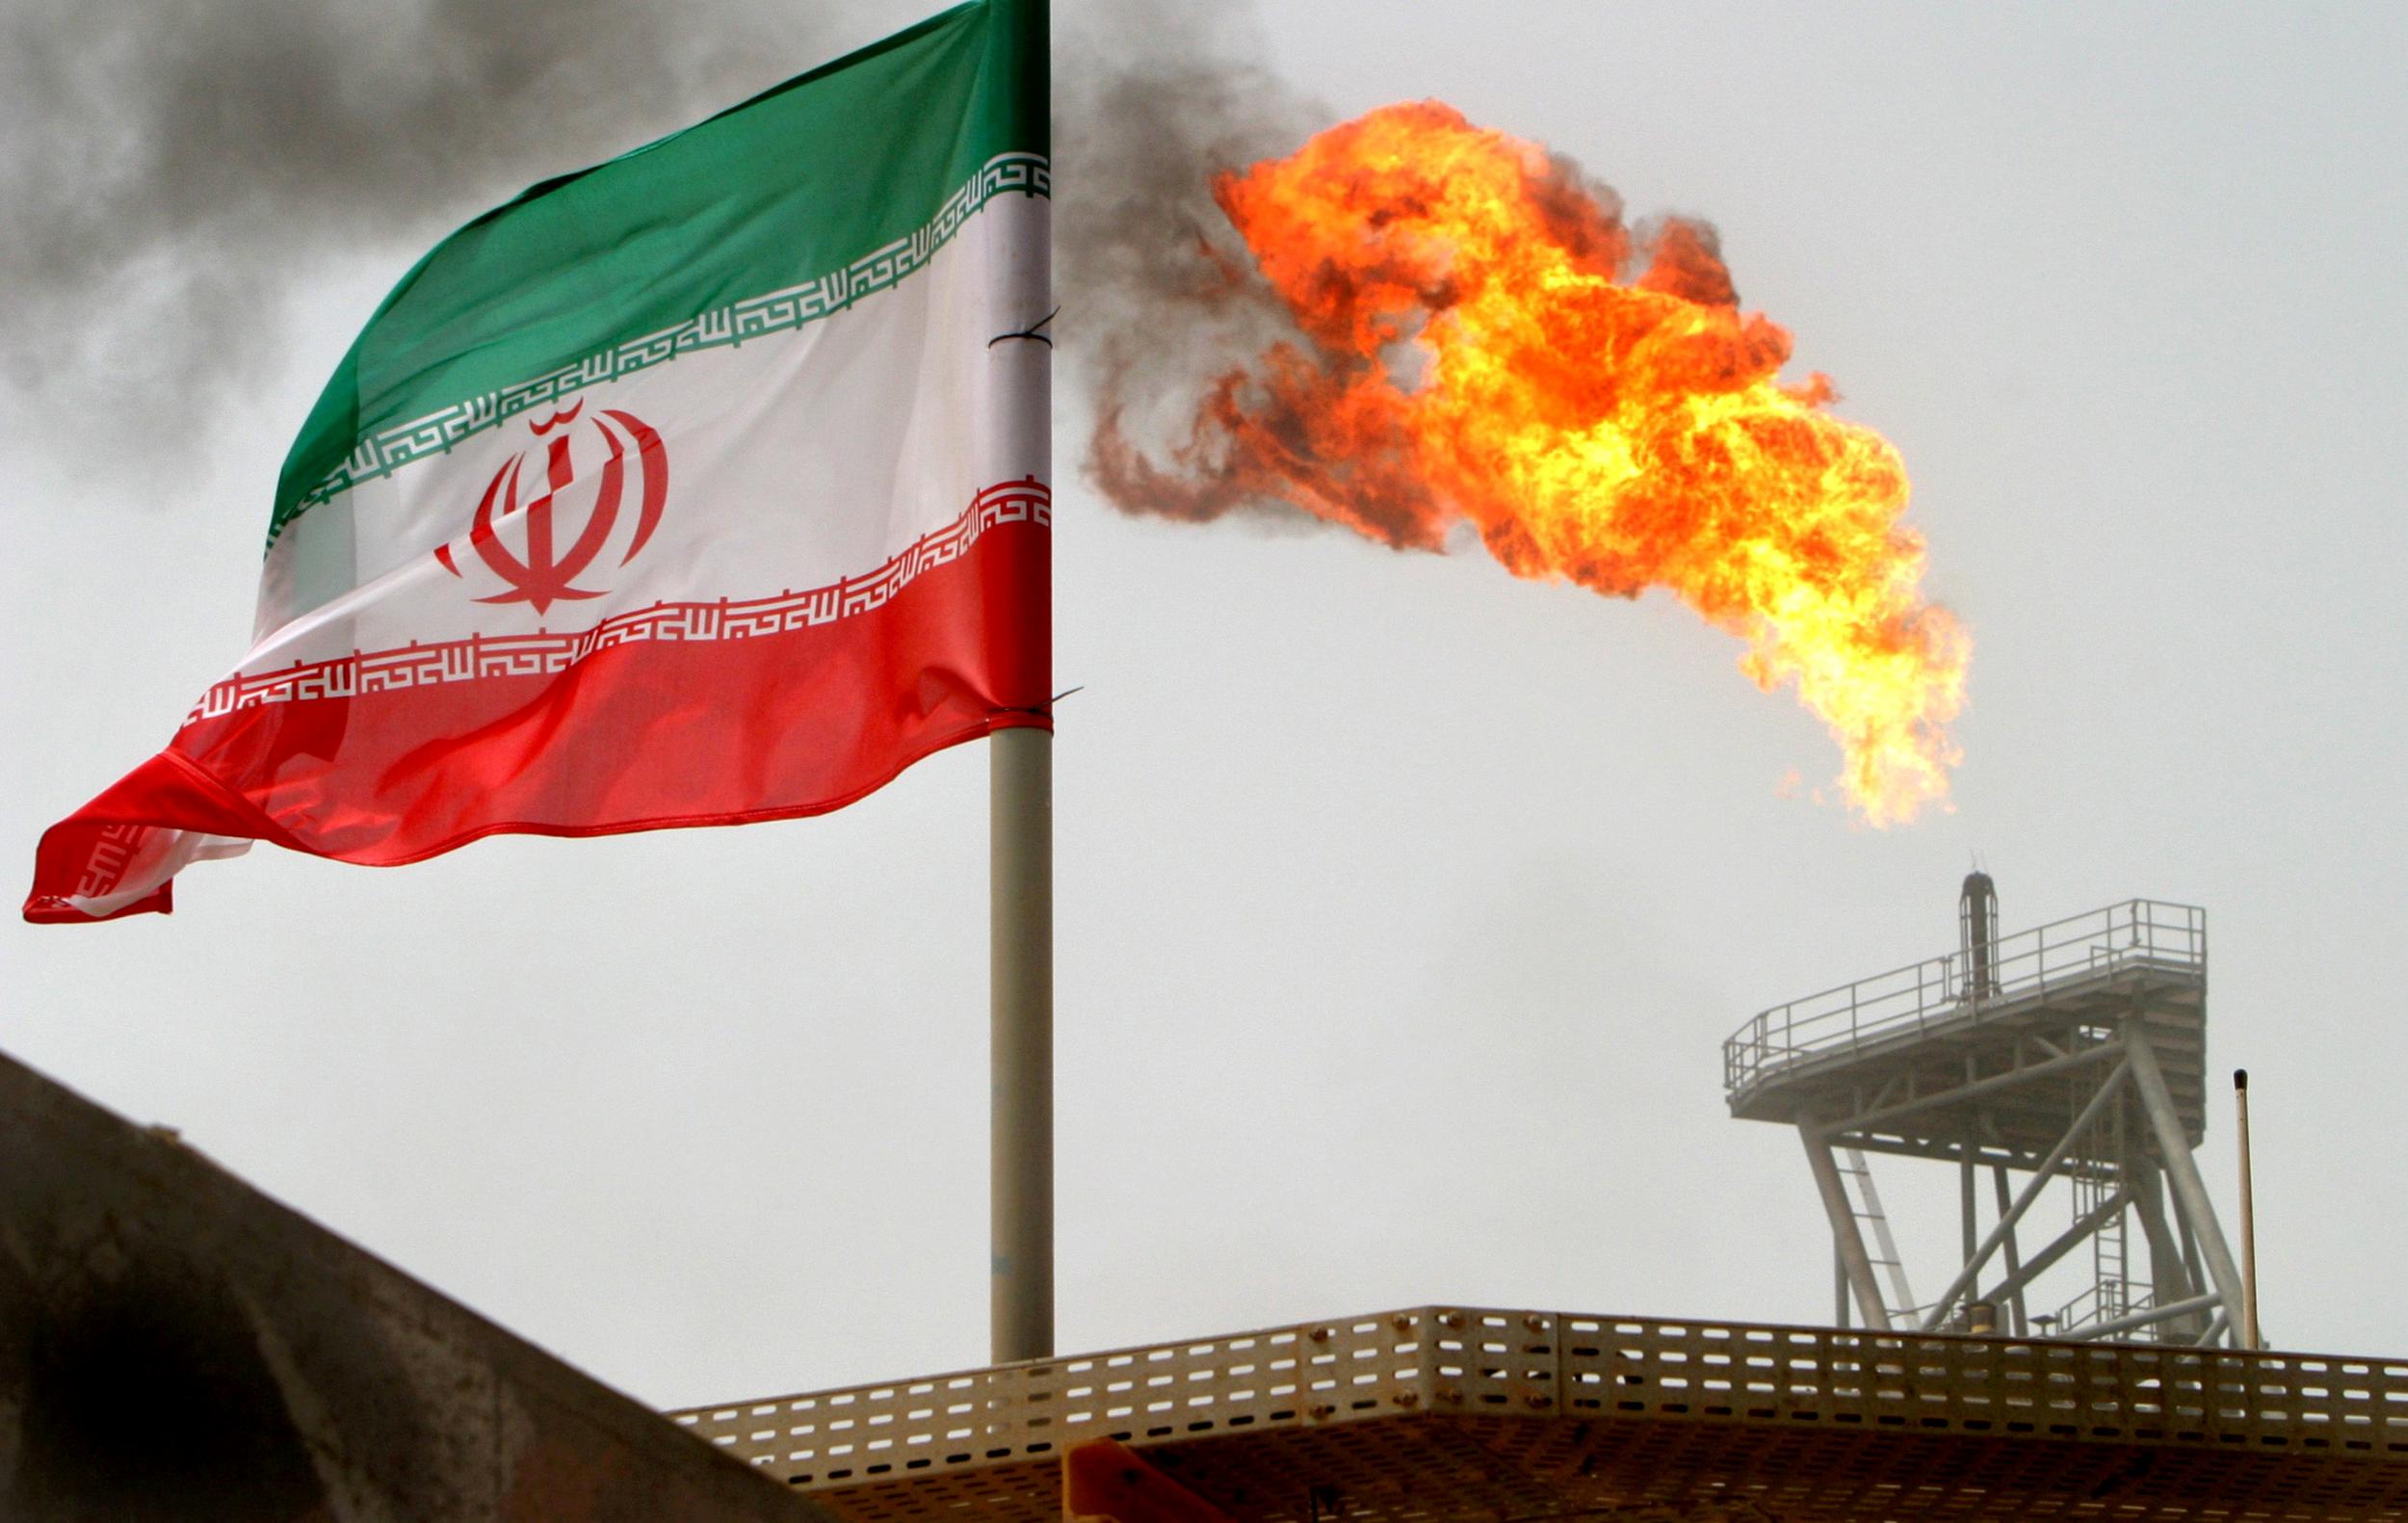 Goldman Sachs says geopolitical tensions could oil push oil prices higher by $2.50 per barrel